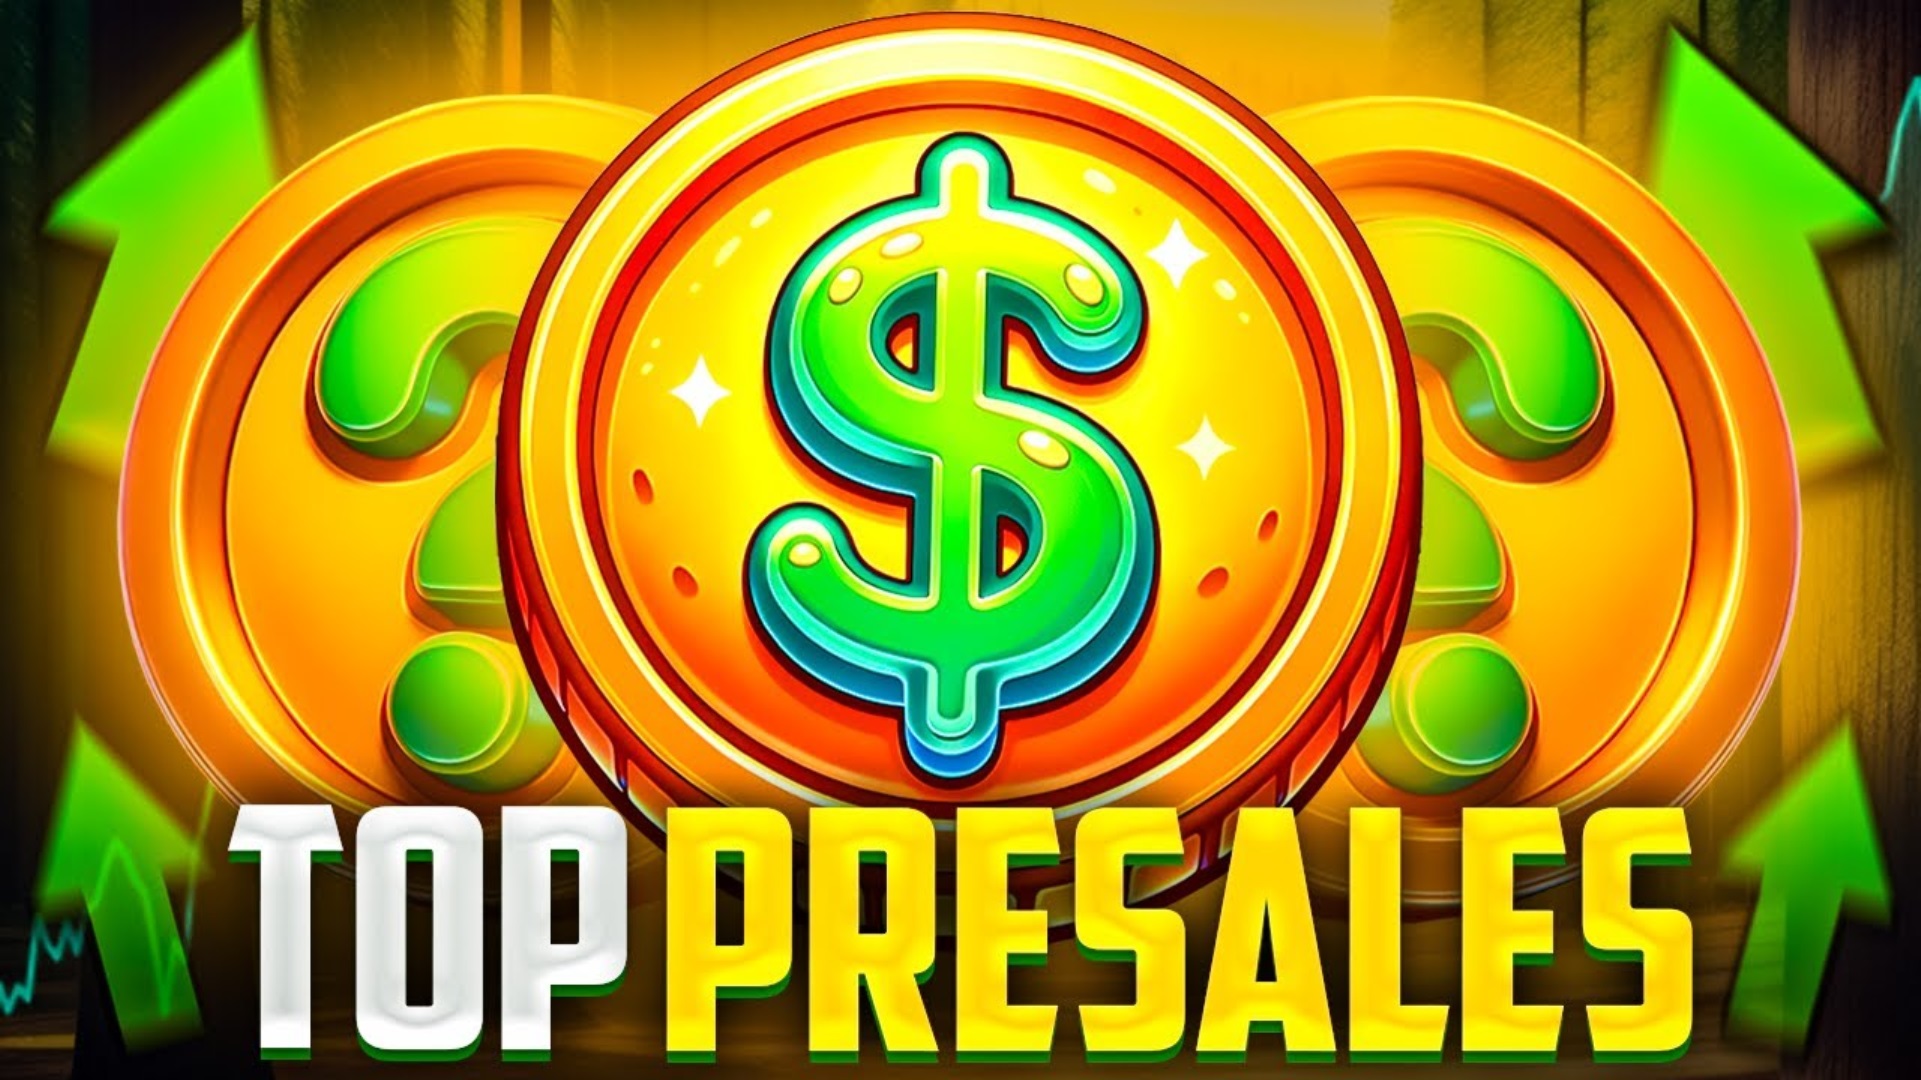 Top Crypto Presales to Buy Now for Massive 10x Returns